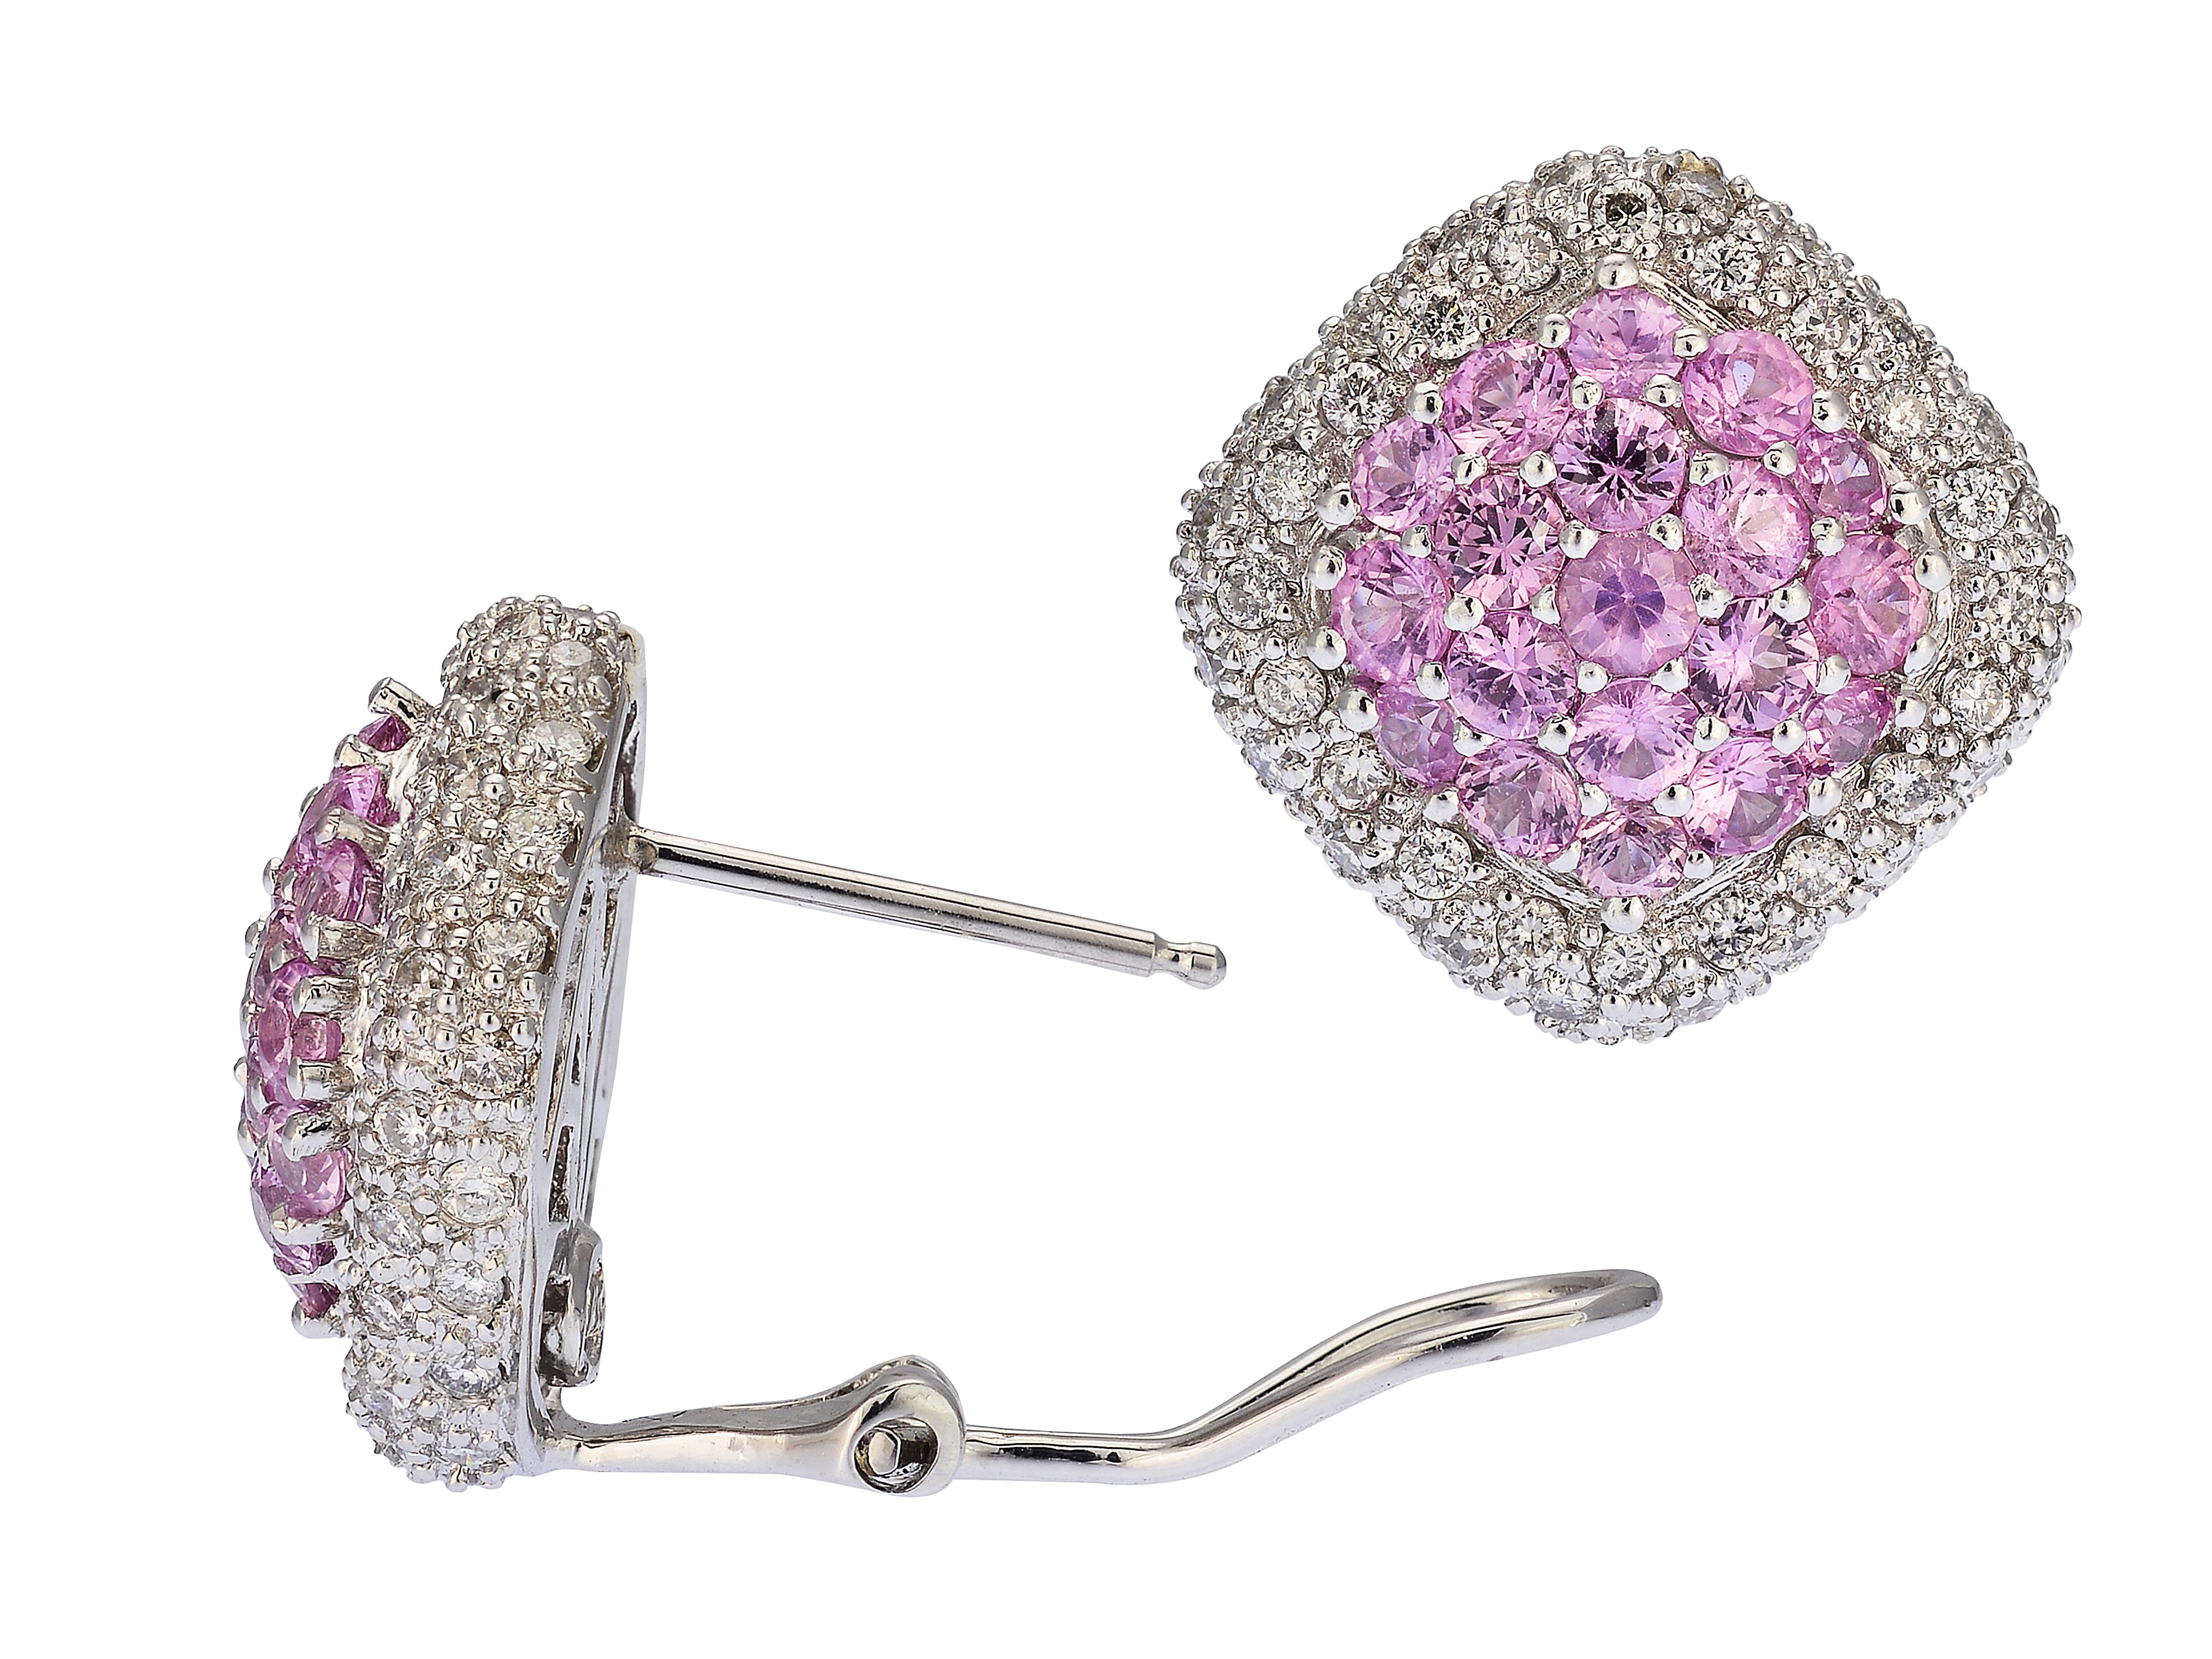 Beautifully crafted pink sapphire and diamond clip on earrings made in 18 karat white gold. They contain 38 round pink sapphires totaling approximately 2 carats, and 120 round diamonds totaling approximately 1.20 carats. The closure is an Omega